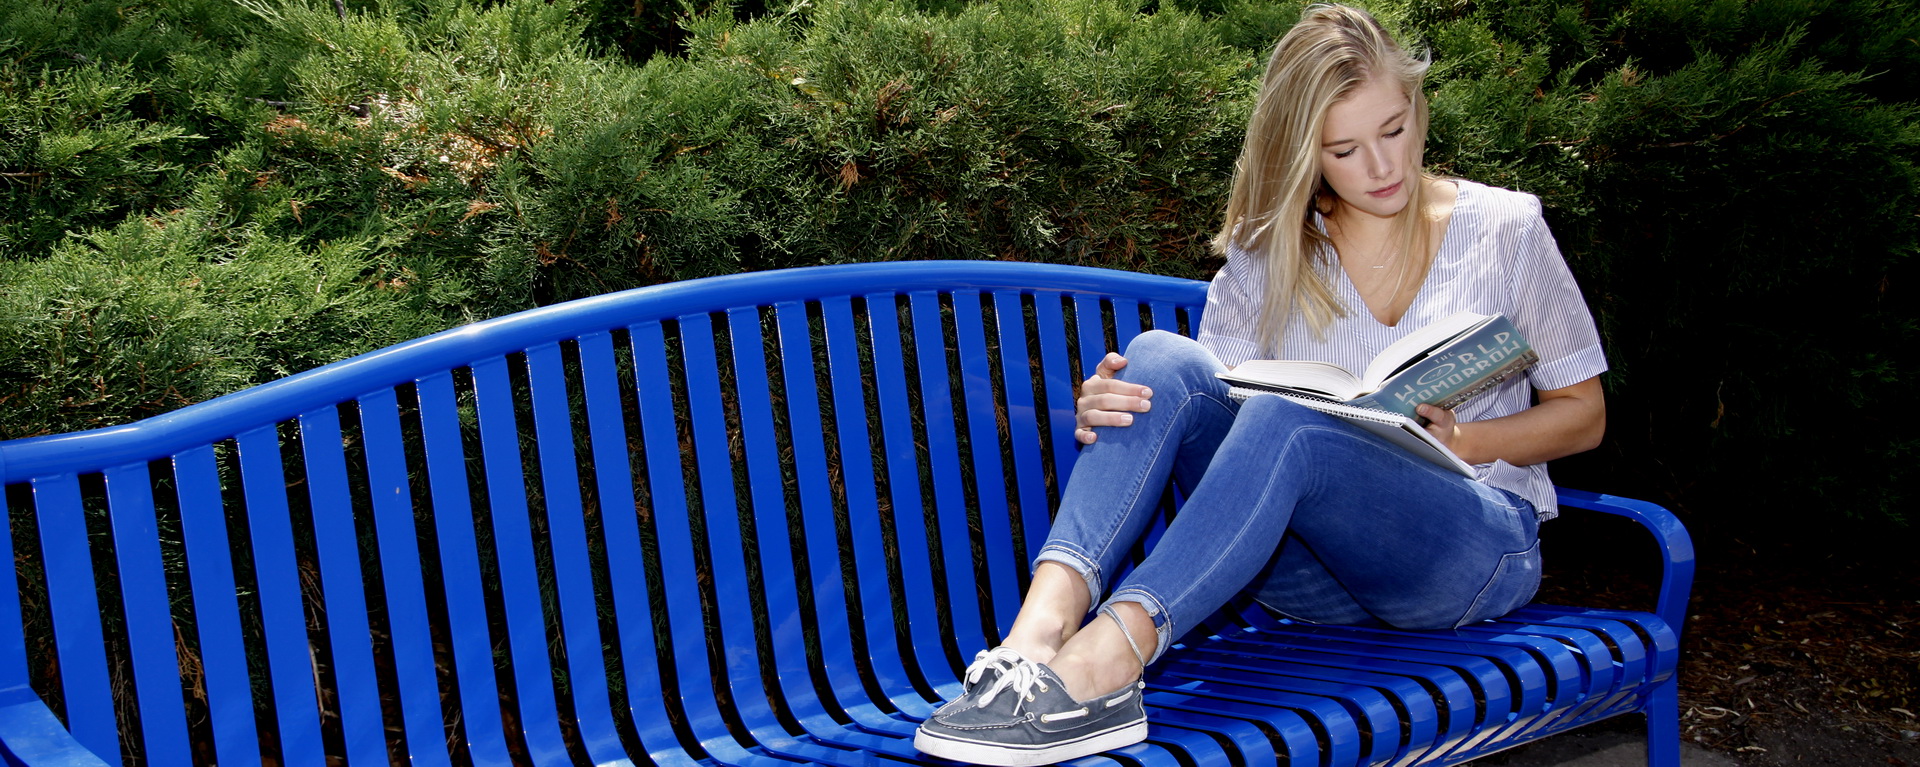 Student reading on a blue bench